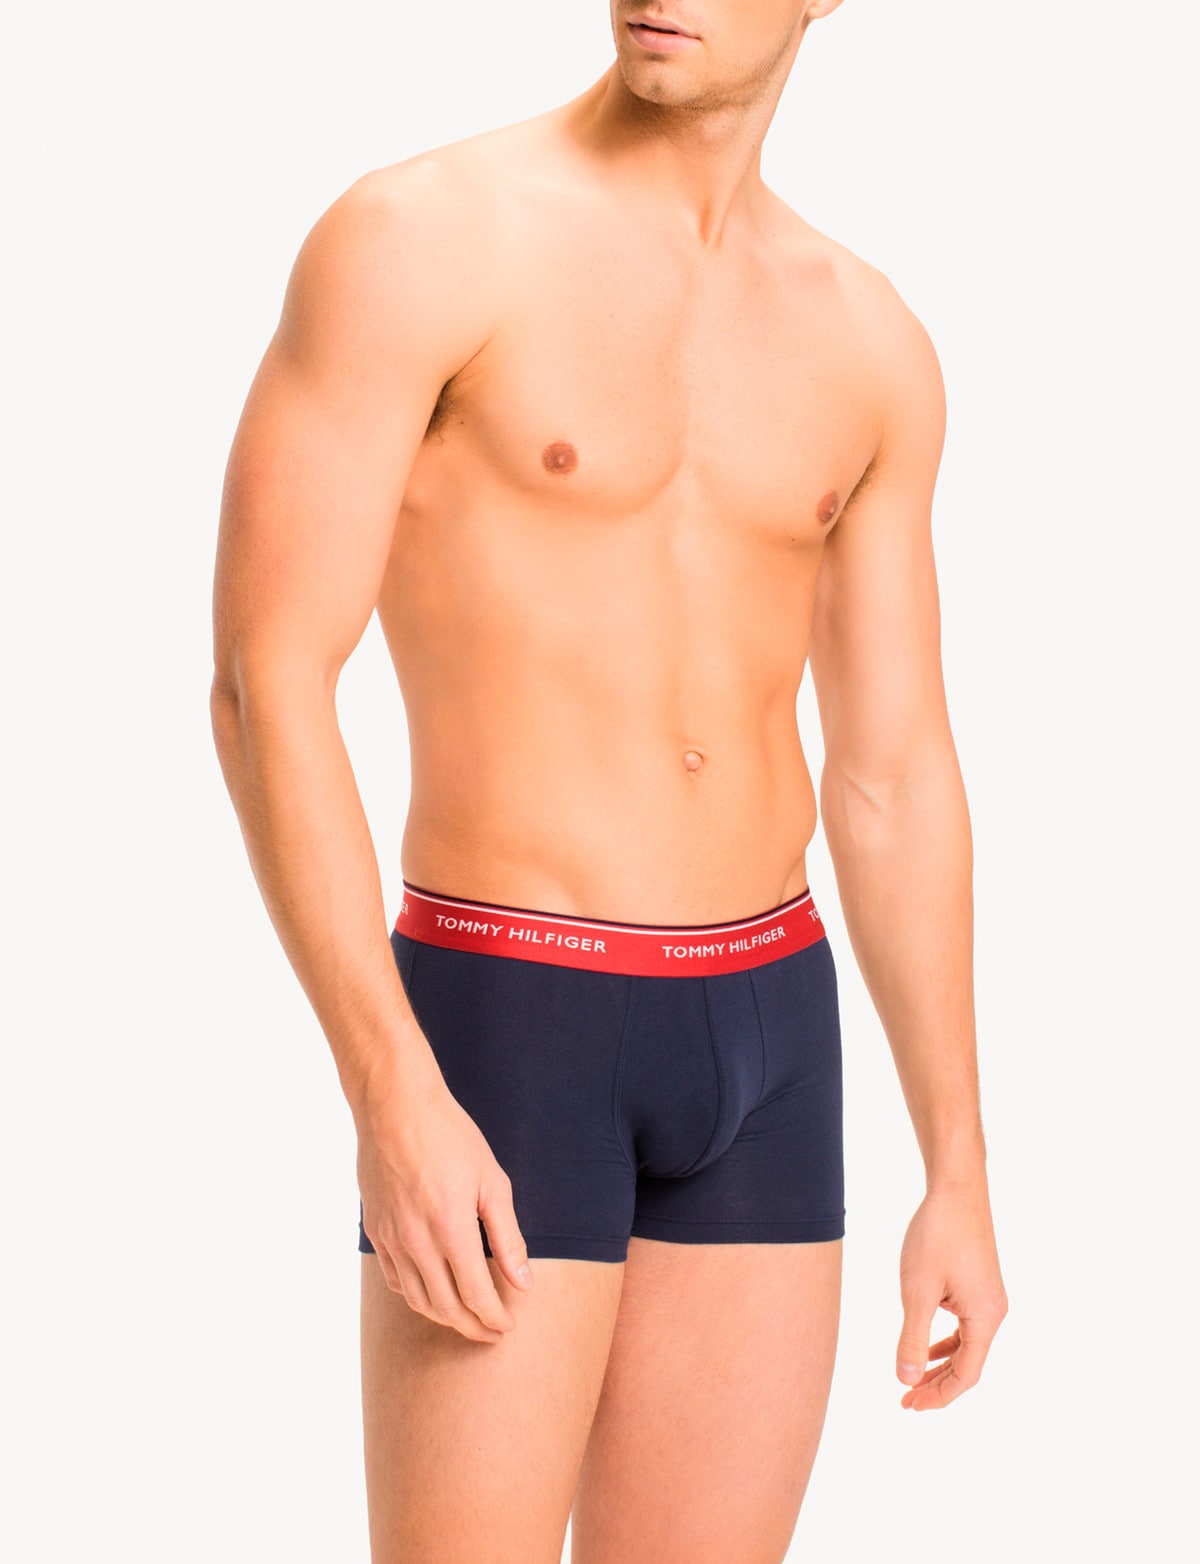 3 Tommy Hilfiger Trunks Cotton Stretch 3 Pack Underwear SALE !! Free  Shipping !! - Helia Beer Co